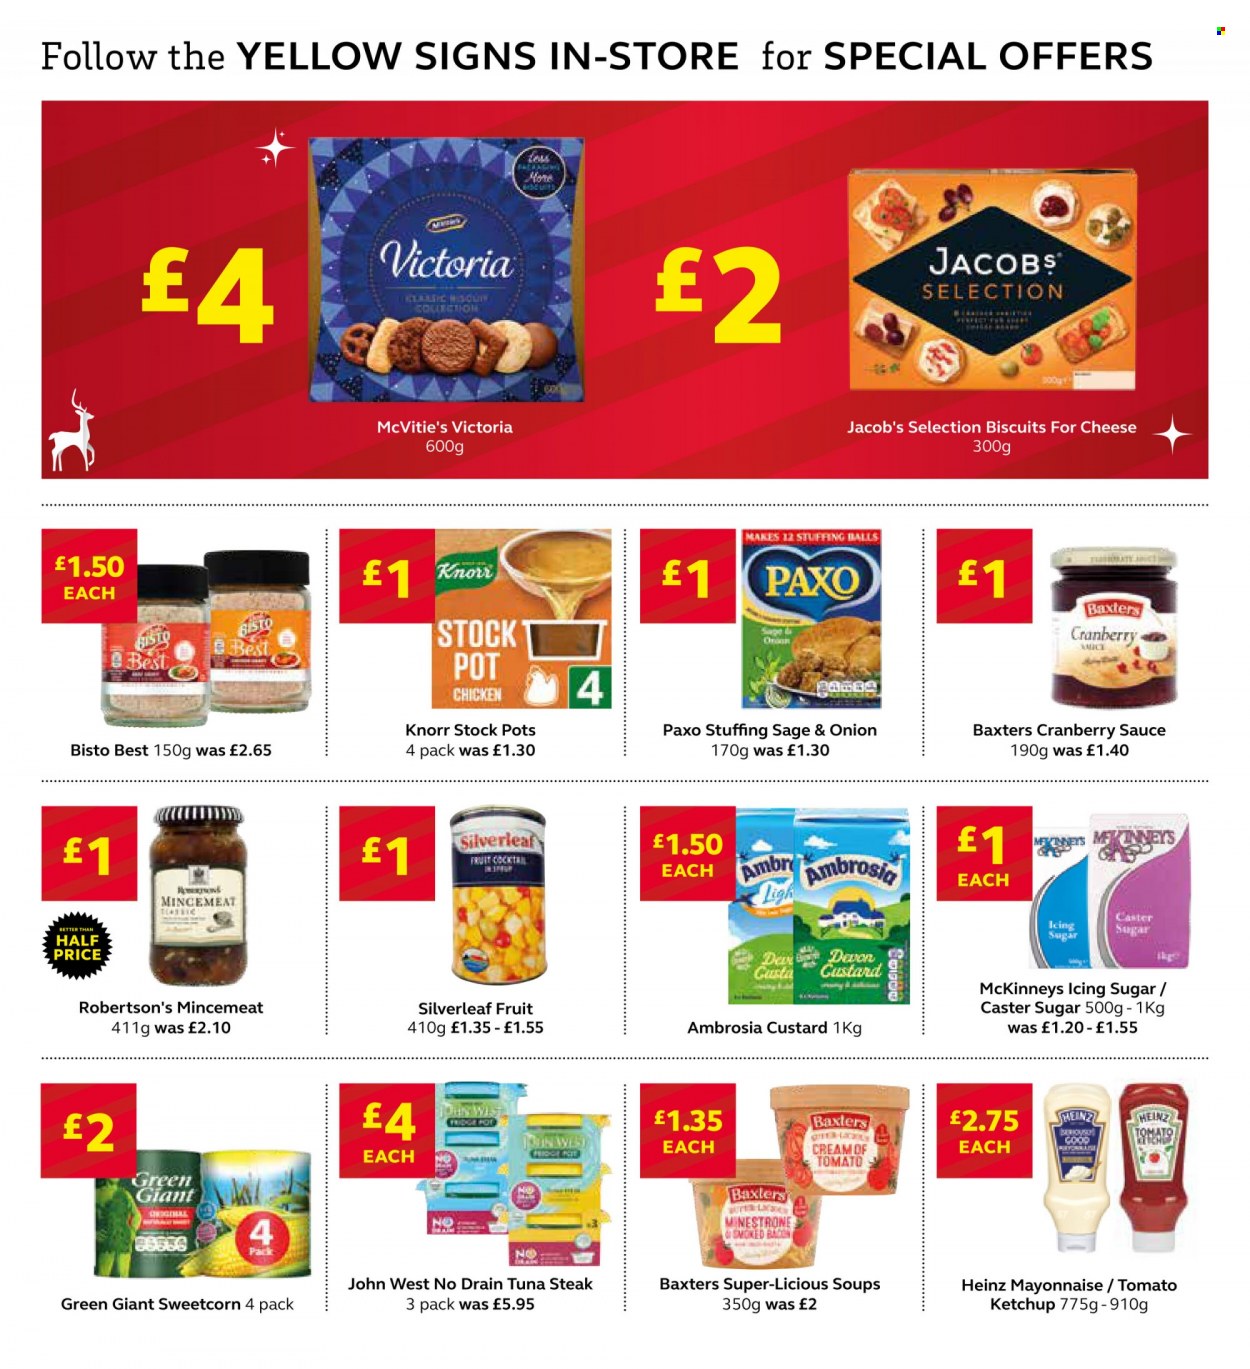 thumbnail - SuperValu offer  - 08/11/2021 - 04/12/2021 - Sales products - steak, tuna, Knorr, sauce, bacon, cheese, custard, mayonnaise, biscuit, Victoria Sponge, icing sugar, sugar, caster sugar, tuna steak, Heinz, ketchup, stockpot, cranberry sauce, Jacobs, pot. Page 8.